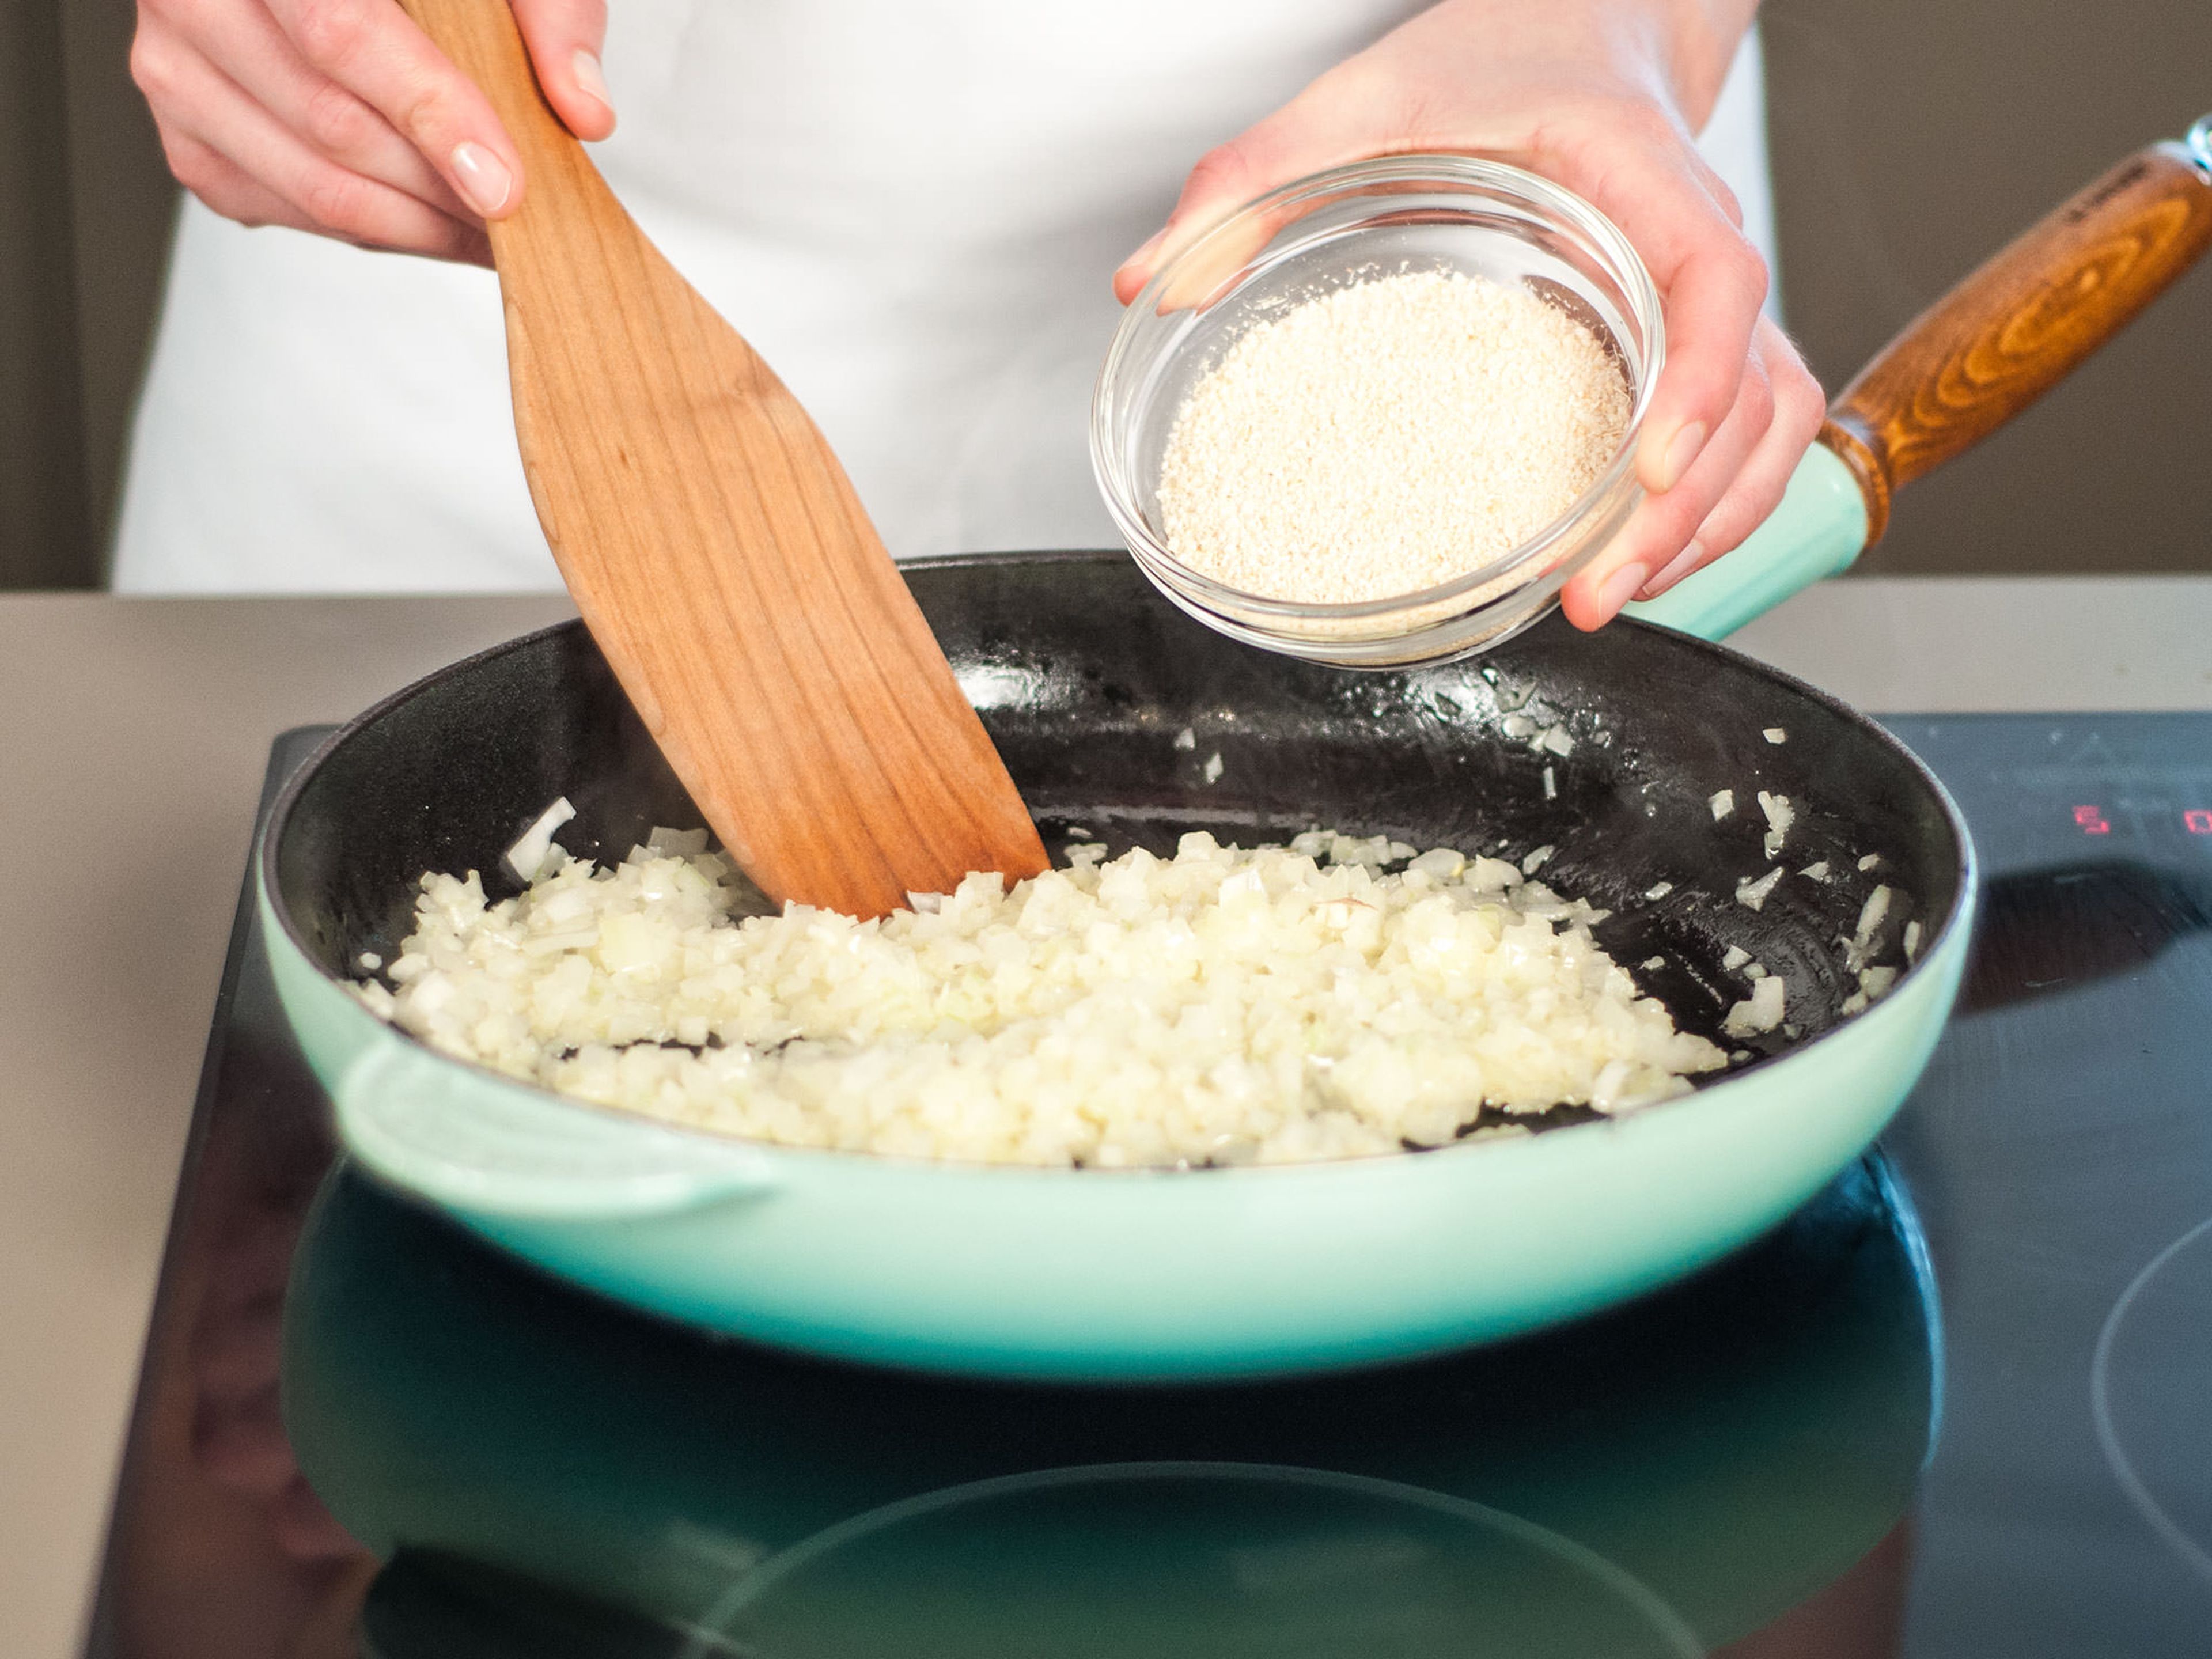 Add one third of the butter to a frying pan. Add onions and garlic and sauté for approx. 3 – 4 min. over medium heat until translucent. Then add roasted manioc flour and stir to combine. Continue to cook for approx. 1 – 2 min.